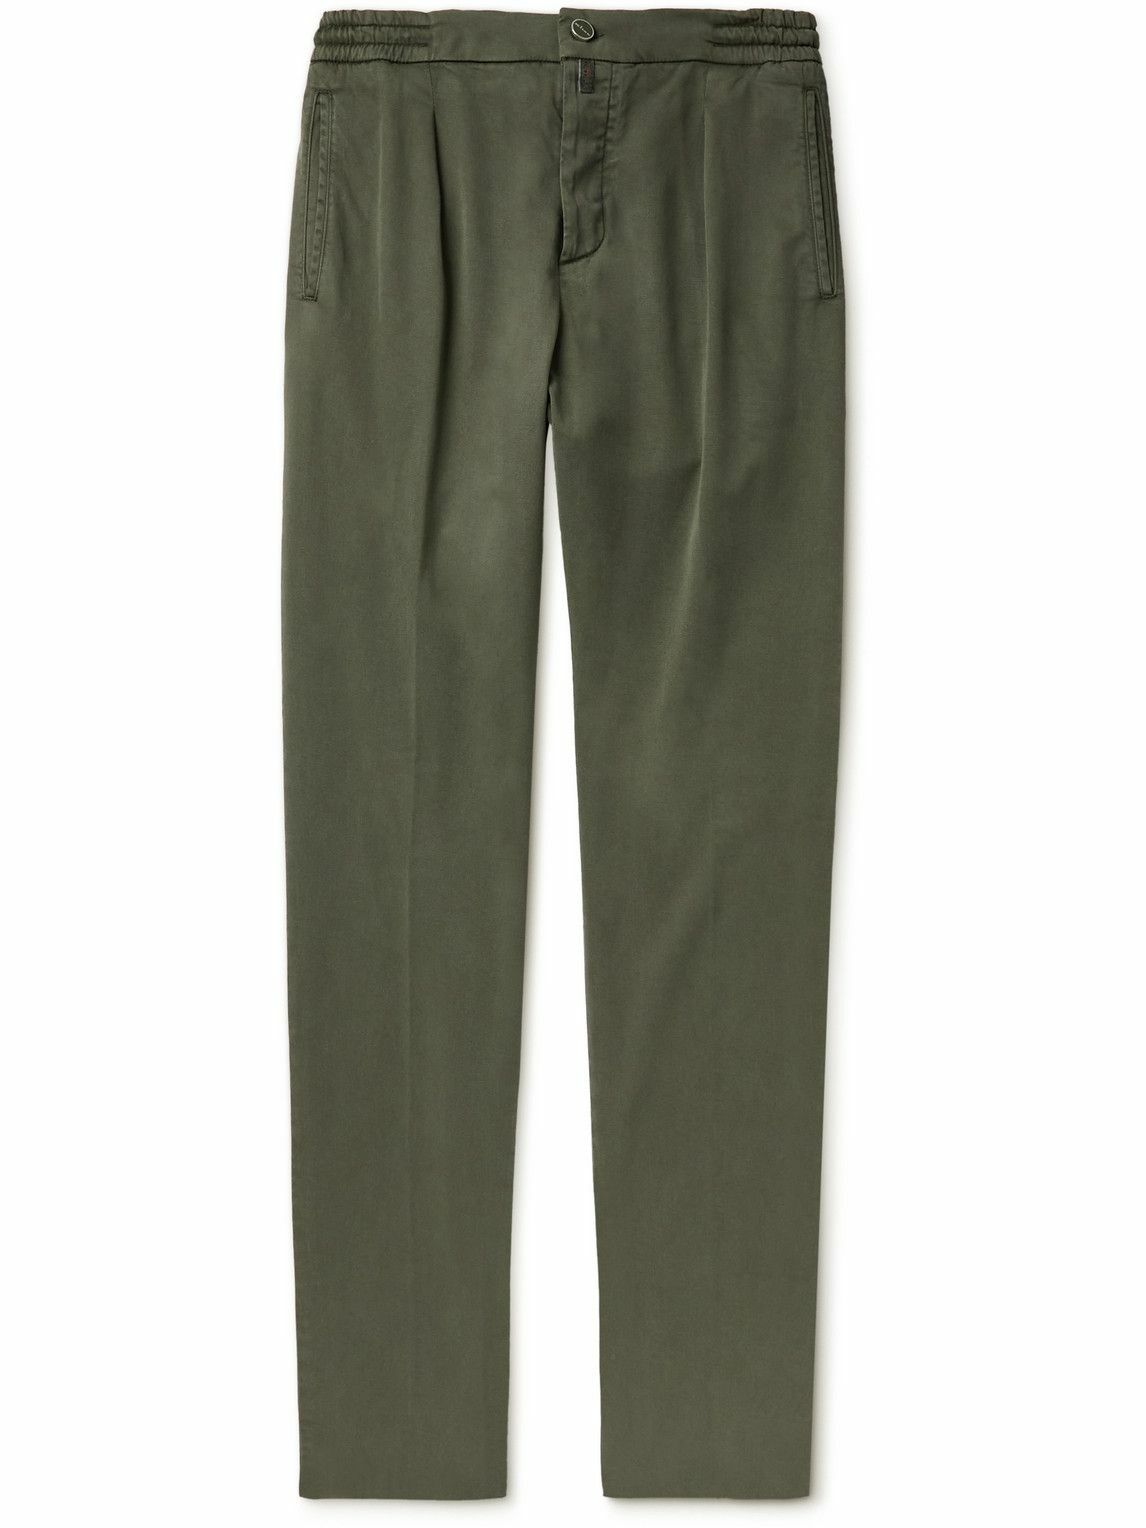 Kiton - Tapered Pleated Stretch-Lyocell Twill Trousers - Green Kiton